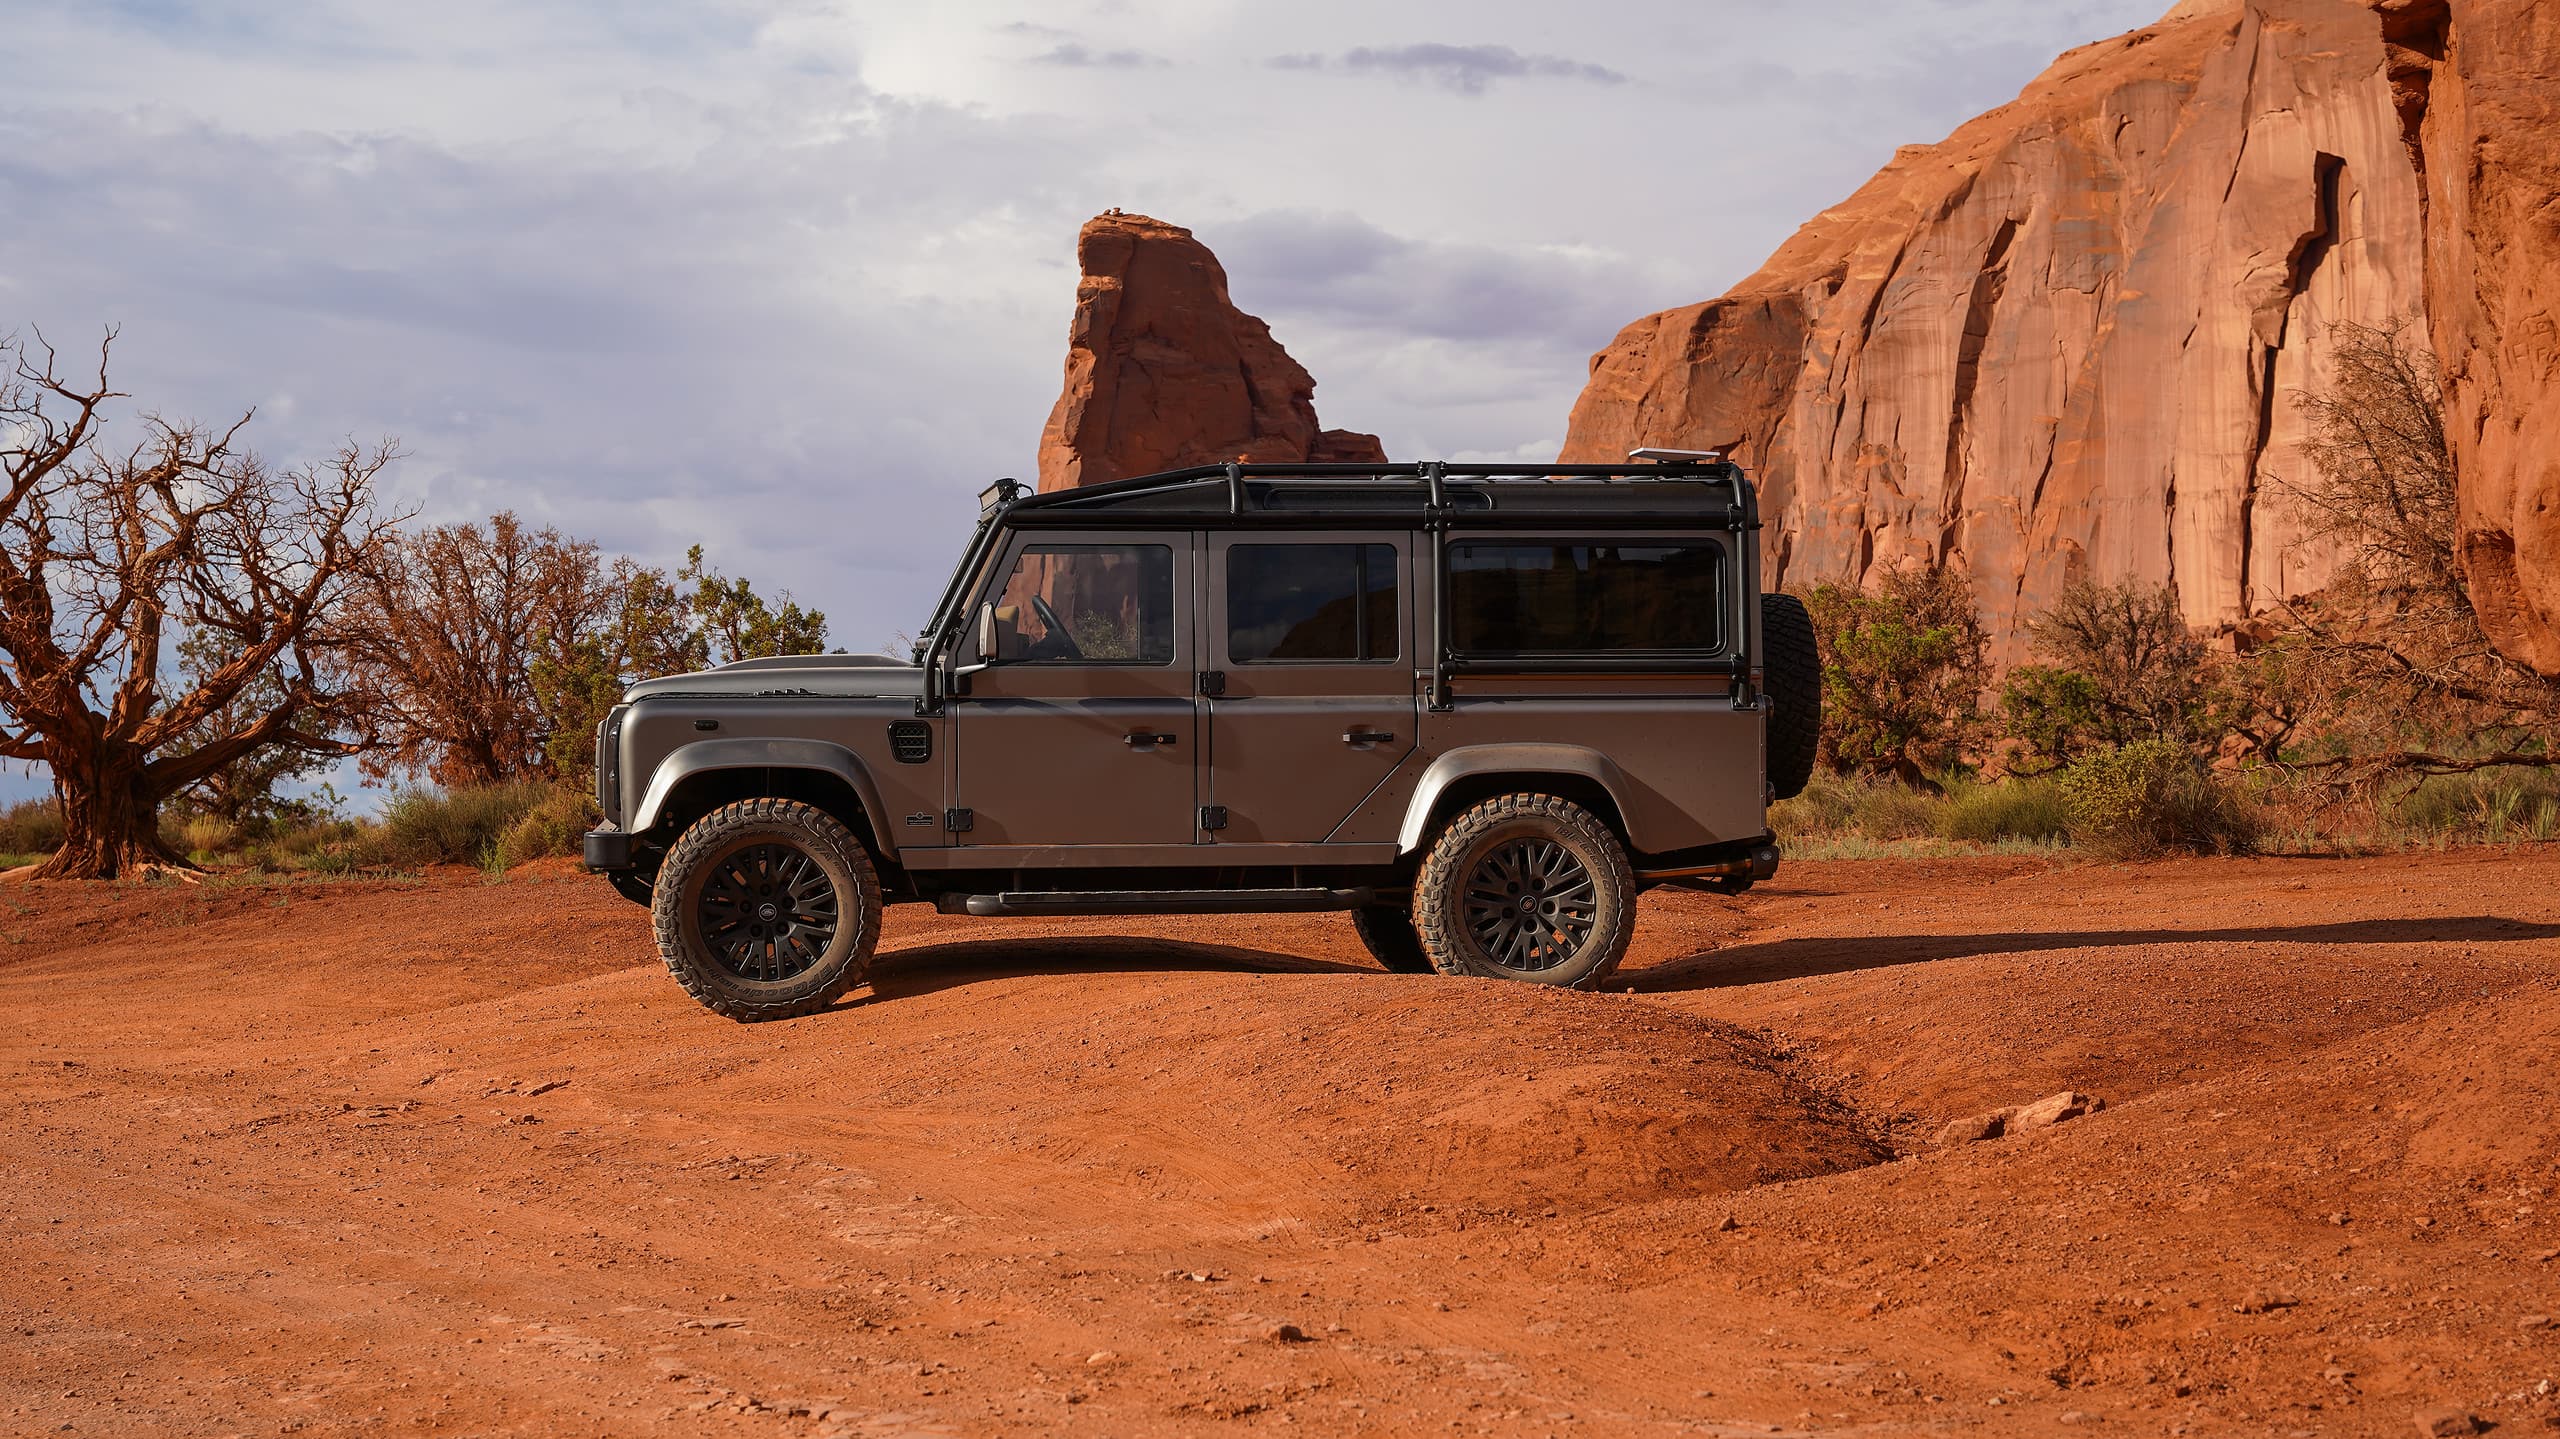 Restored Land Rover Defender - The Landrovers